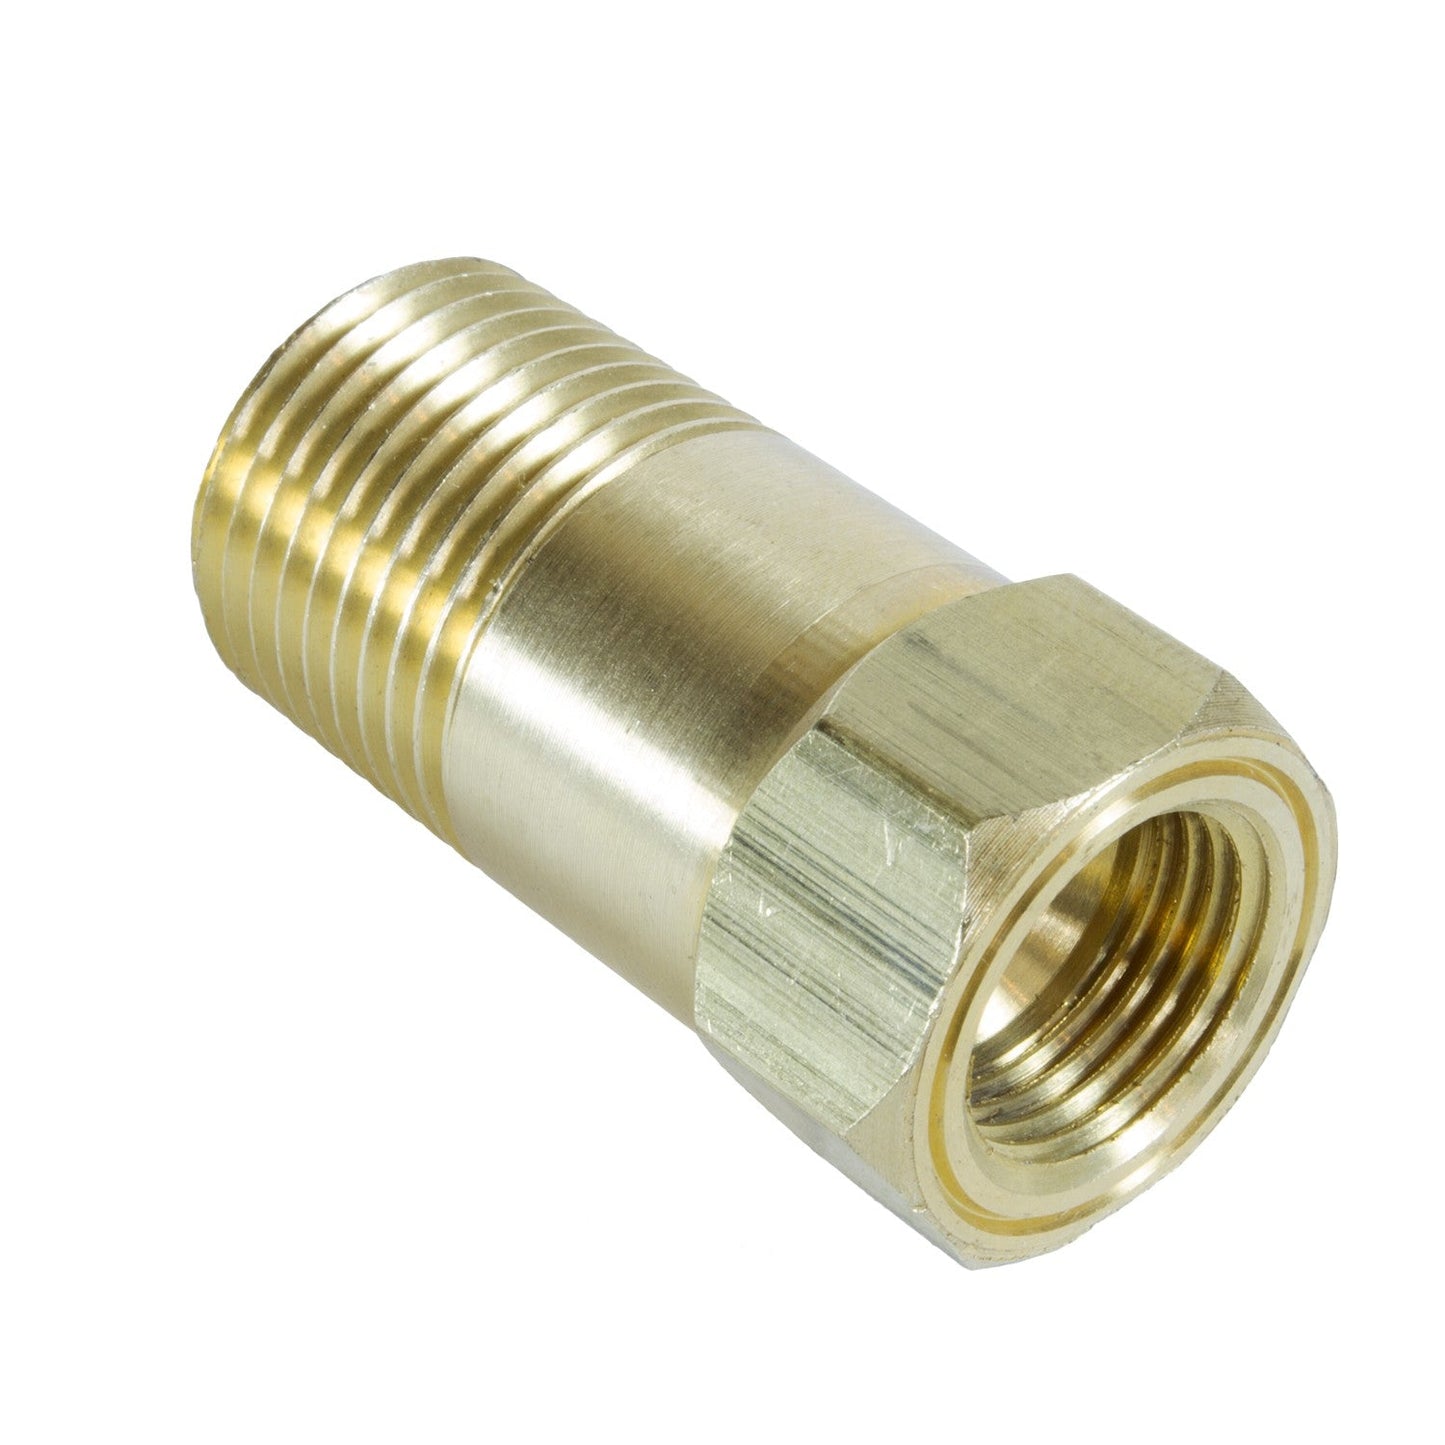 AutoMeter - FITTING, ADAPTER, 1/2" NPT MALE, EXTENSION, BRASS, FOR MECH. TEMP. GAUGE (2270)